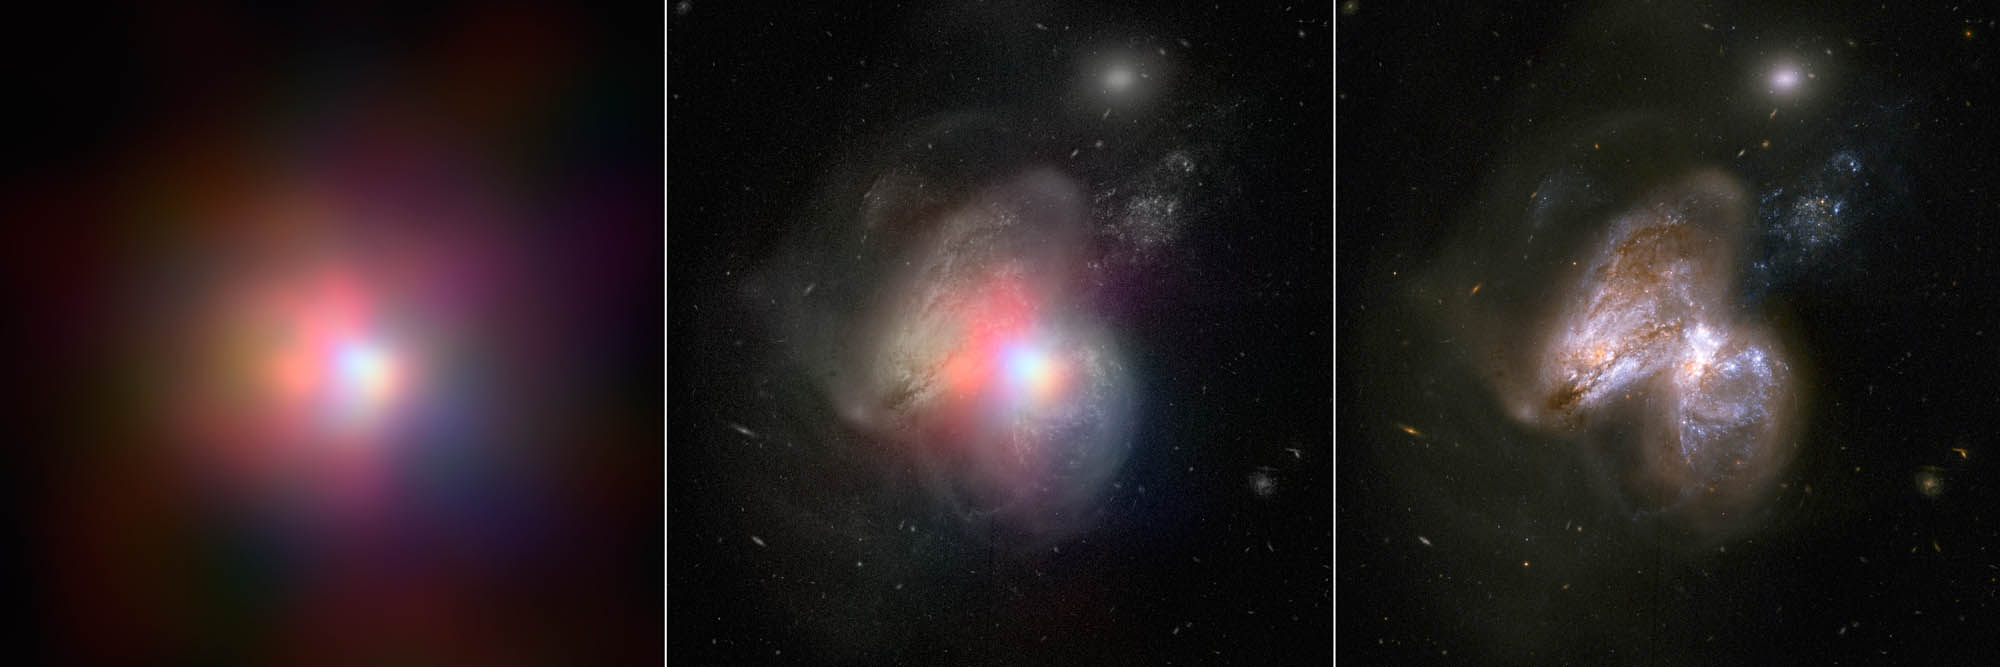 Monster Black Hole Caught Feeding in Galaxy Crash | Space